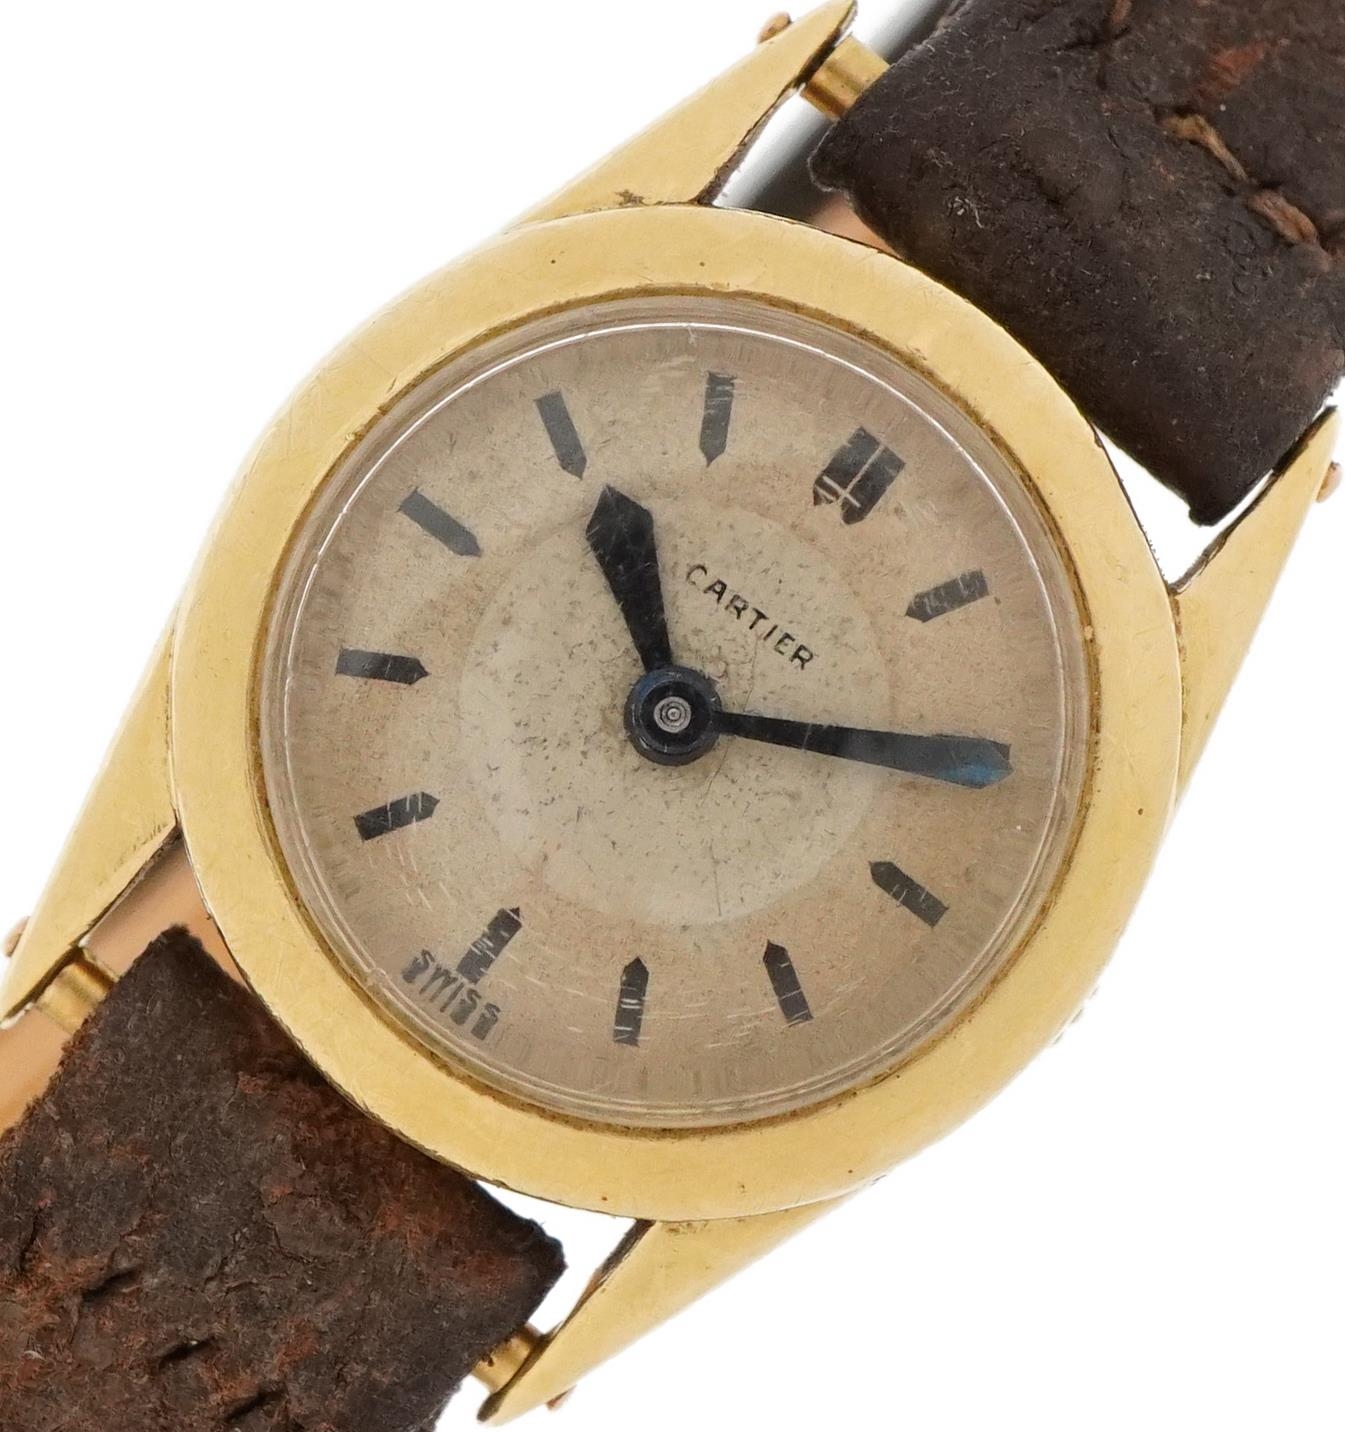 Cartier, early 20th century ladies gold Cartier wristwatch with leather strap and 18ct gold strap - Image 3 of 8